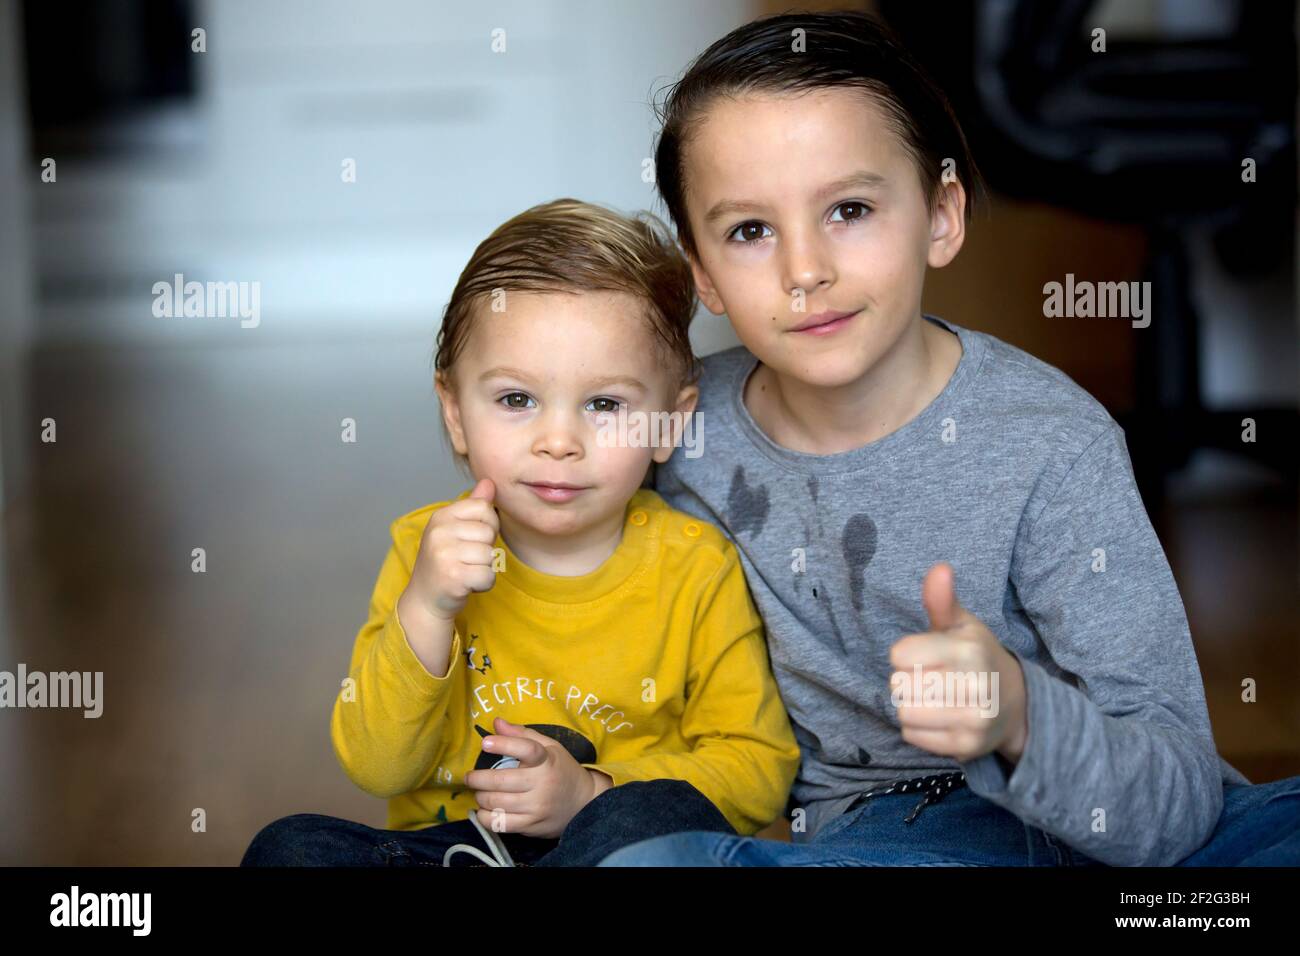 Two boys, brothers, showing thumbs up on the camera at home Stock Photo